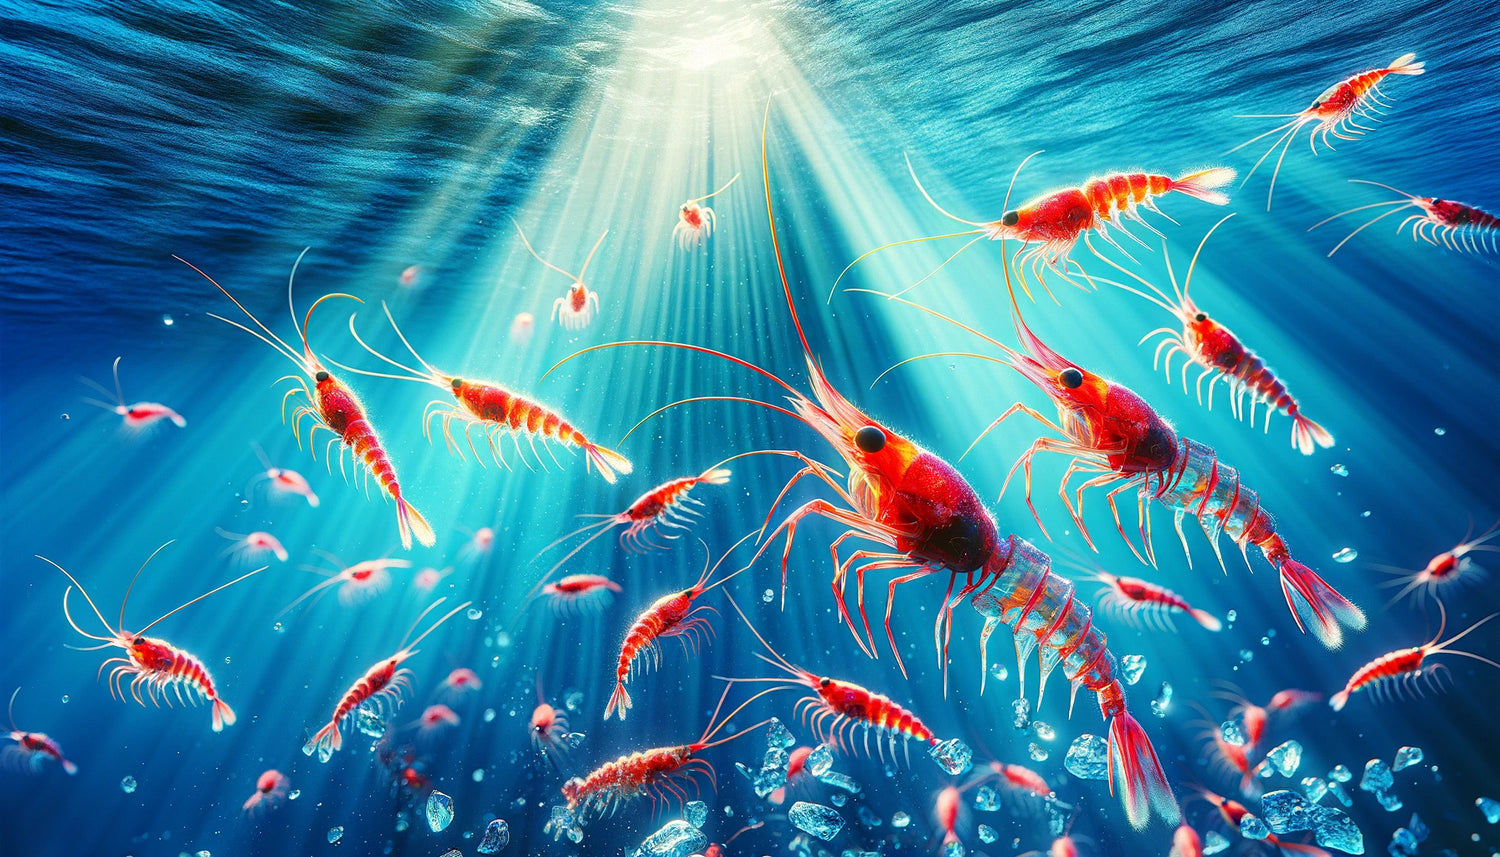 Krill Oil: A Potent Source of Omega-3s and Antioxidants